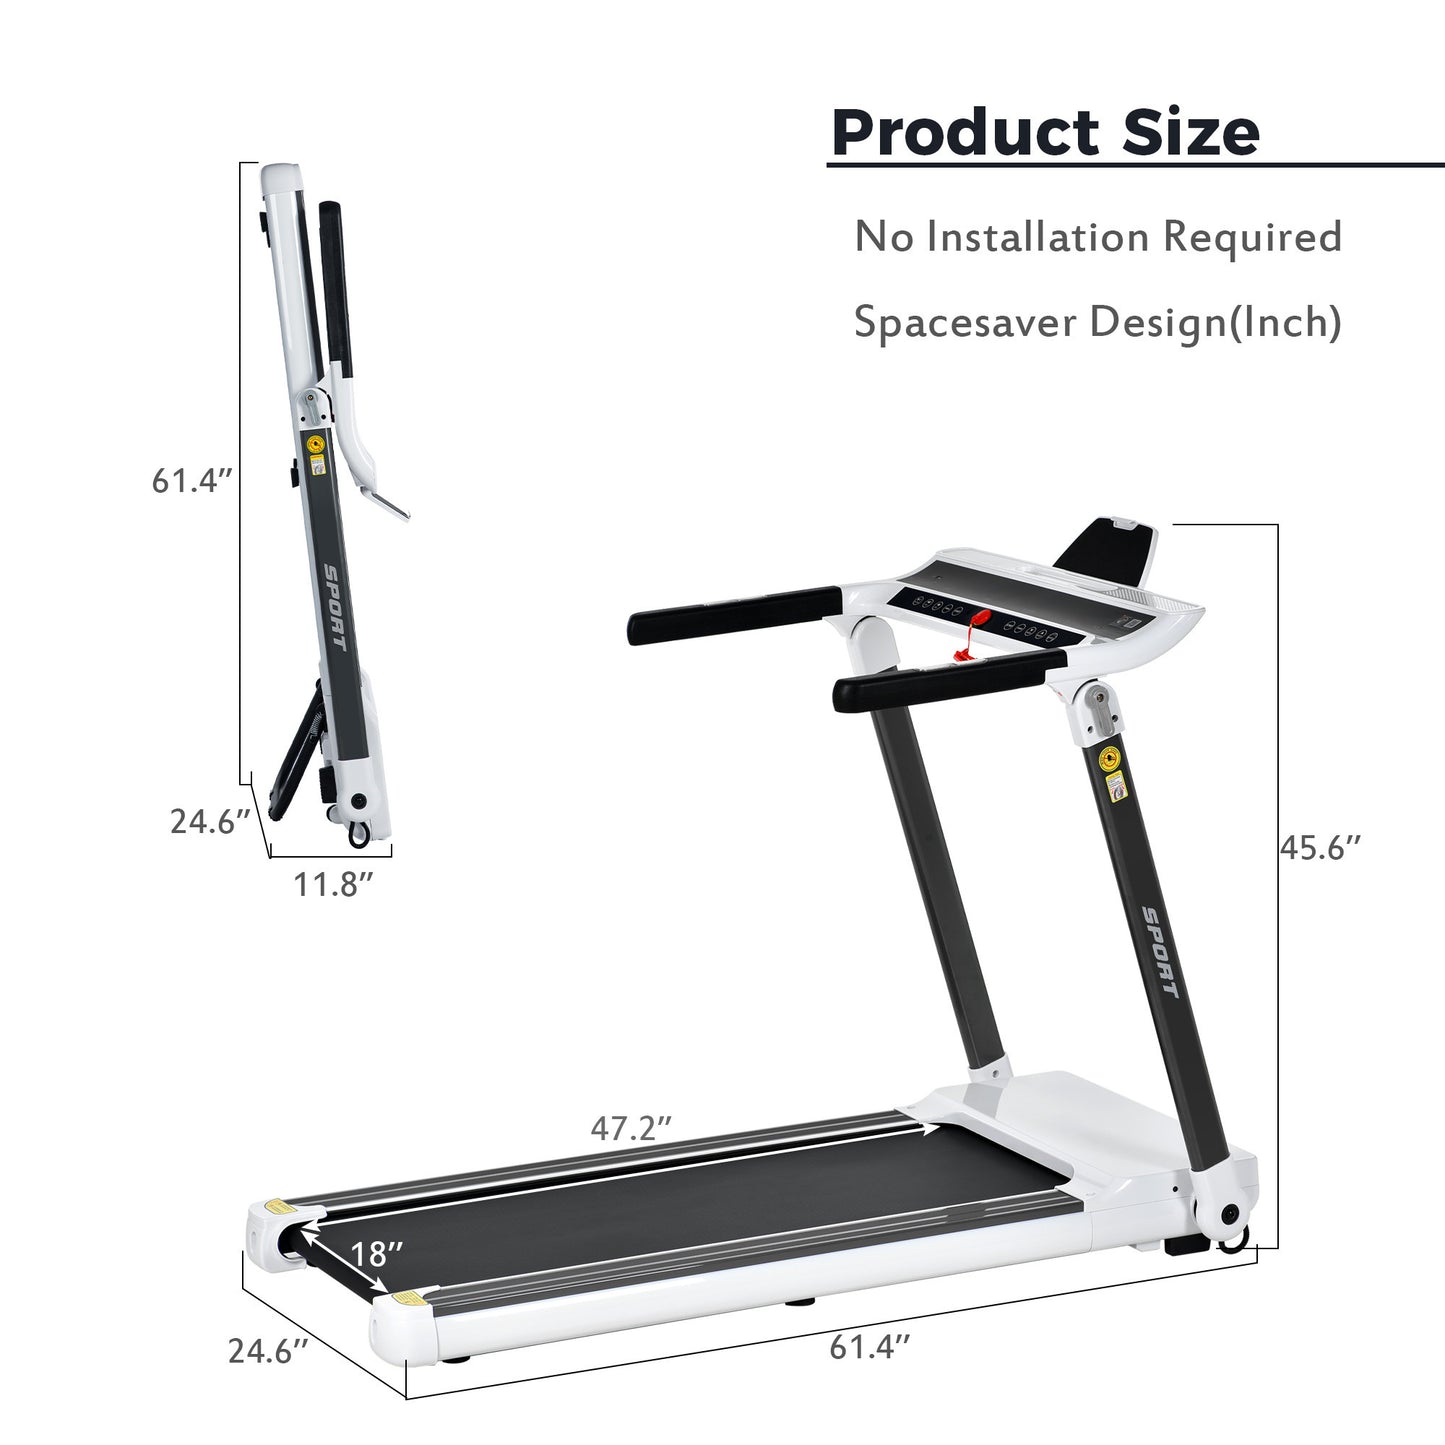 Folding Electric 3.5HP Treadmill Medium Running Machine Motorised Gym 330lbs；Portable Compact Treadmill Foldable for Home Gym Fitness Workout Jogging Walking,Electric Motorized Power 14KM/H